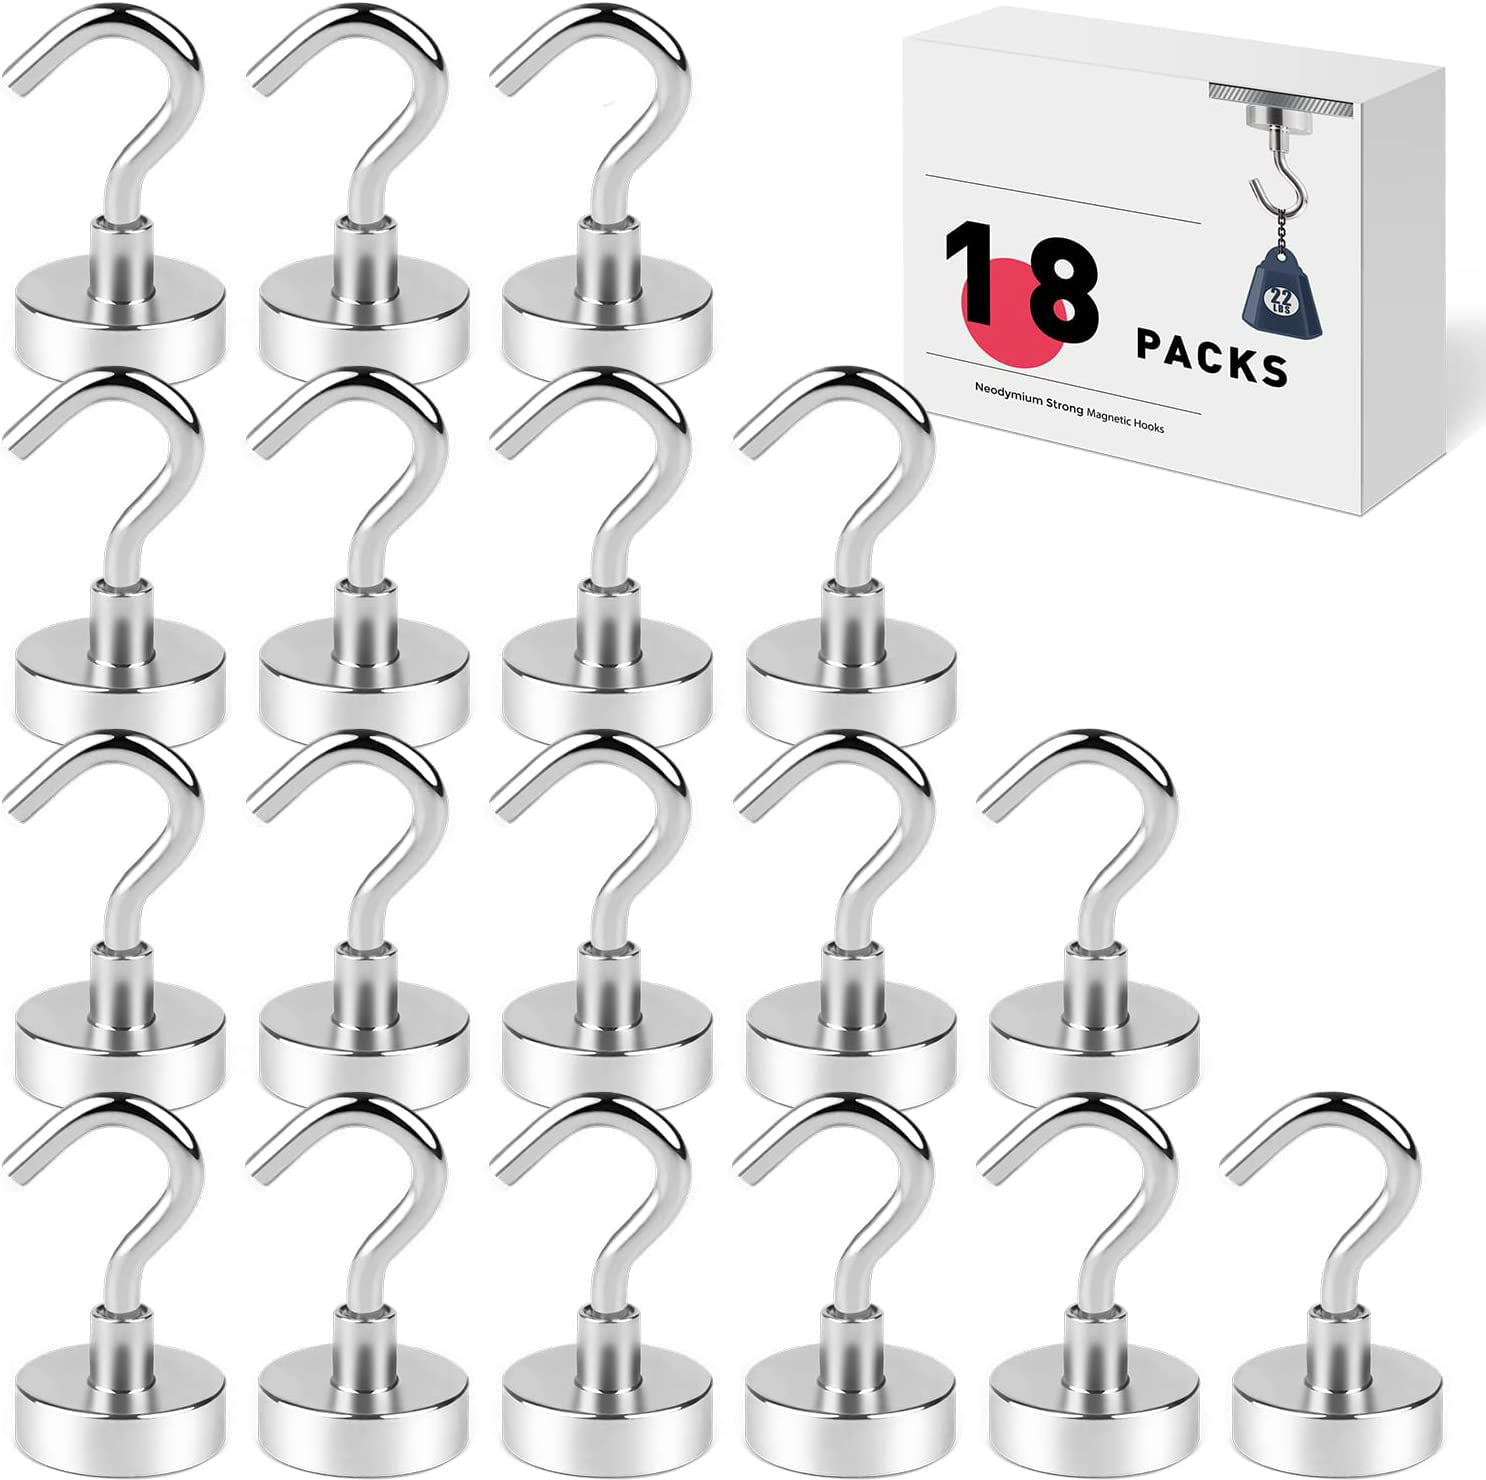 Durable 12pcs Magnetic Hooks Neodymium Strong 22Lbs Rare Earth Magnets Heavy Duty with Hook for Refrigerator,Ceiling Magnets for Hanging for Home Office Workplace Color : 12pcs Black Color 